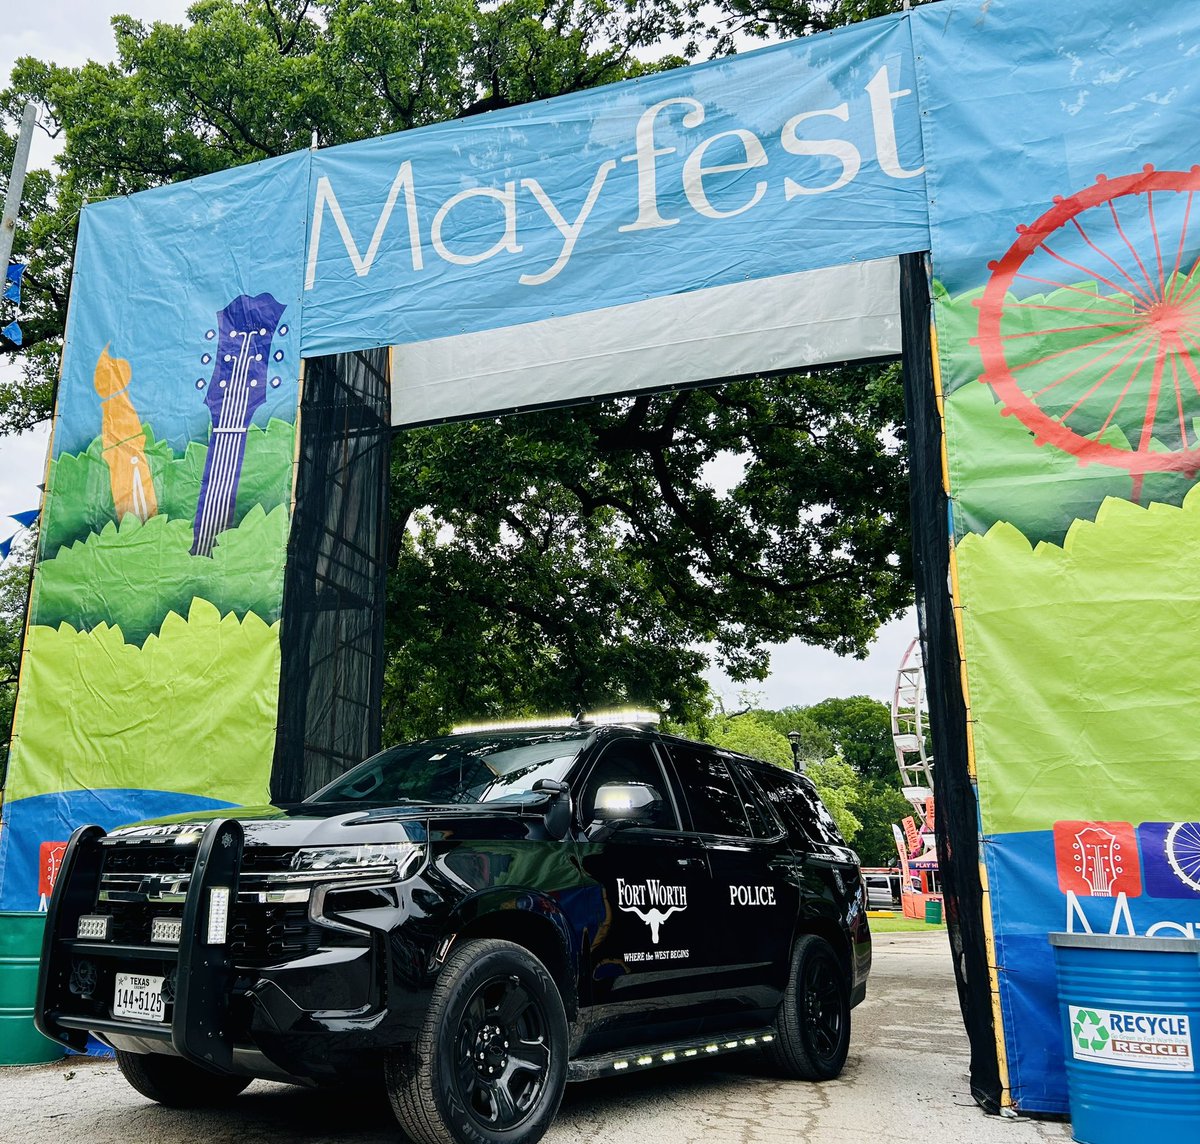 #FortWorthFun Be sure to indulge in all the fun events lined up. Just a heads-up: anticipate possible traffic surrounding Trinity Park. Also, keep an eye on the weather forecast and come prepared for any changes. #StaySafe #Community #Mayfest #FWPD